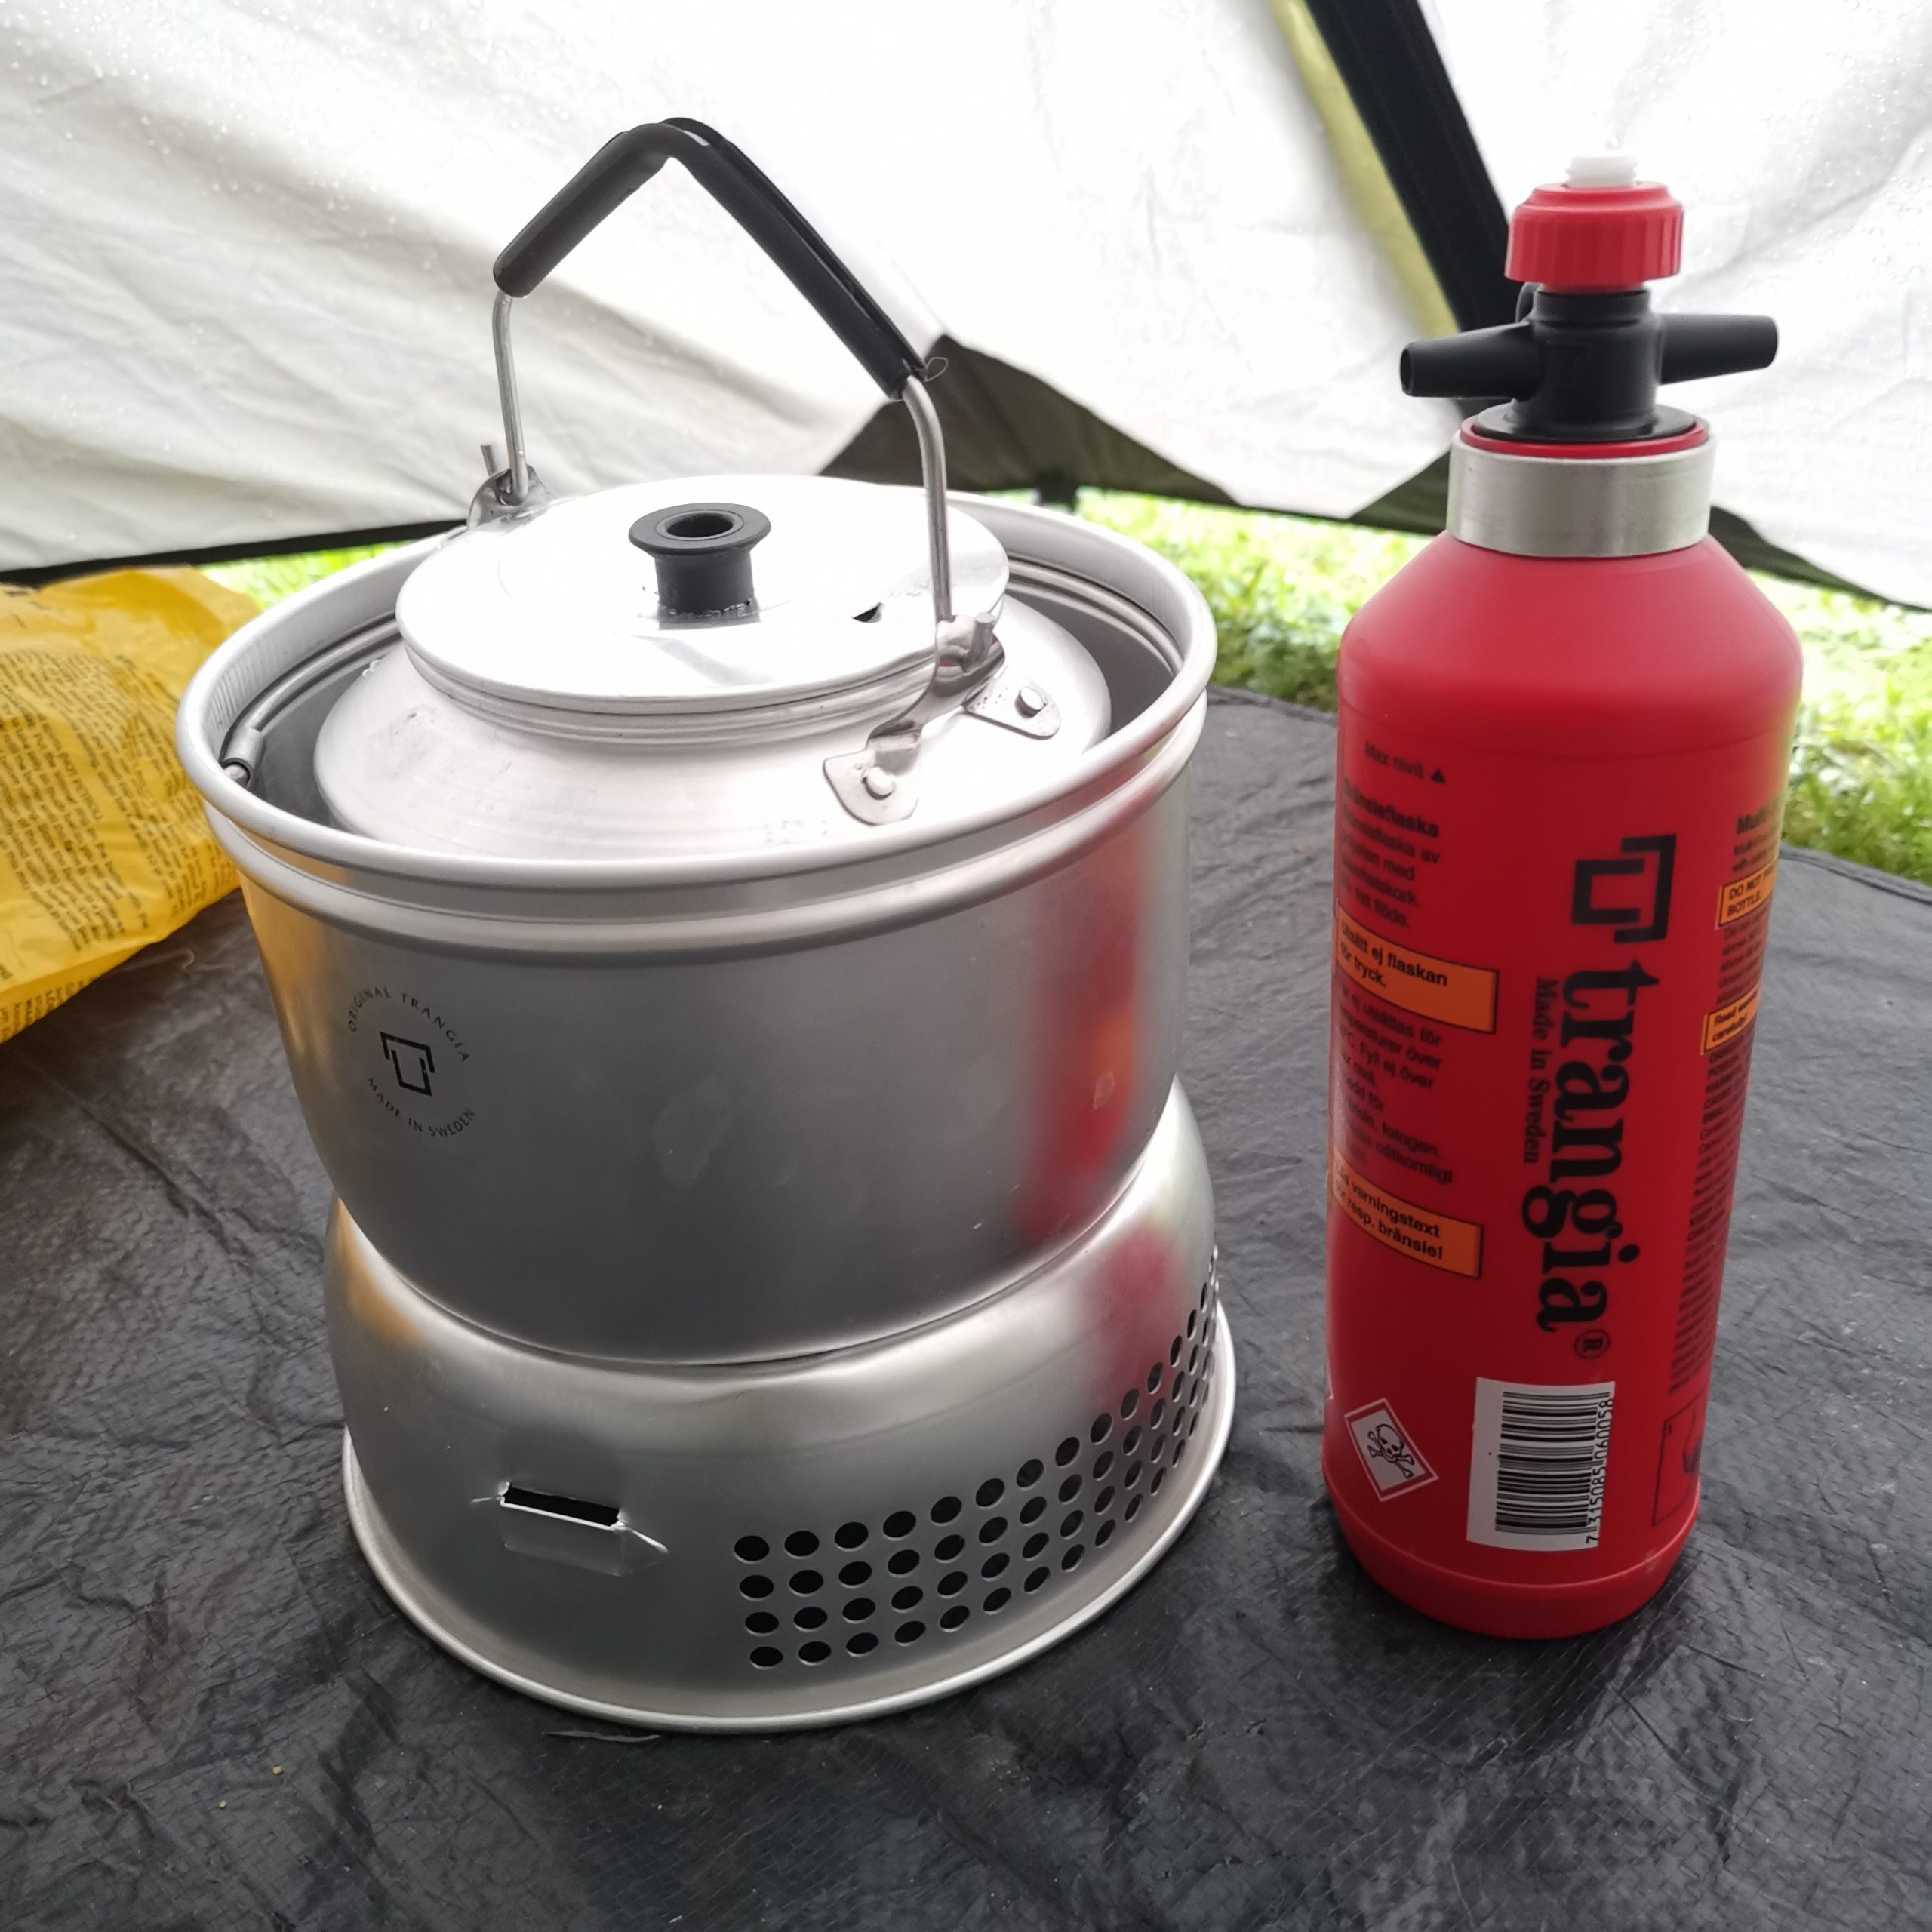 Tragia Stove and Fuel